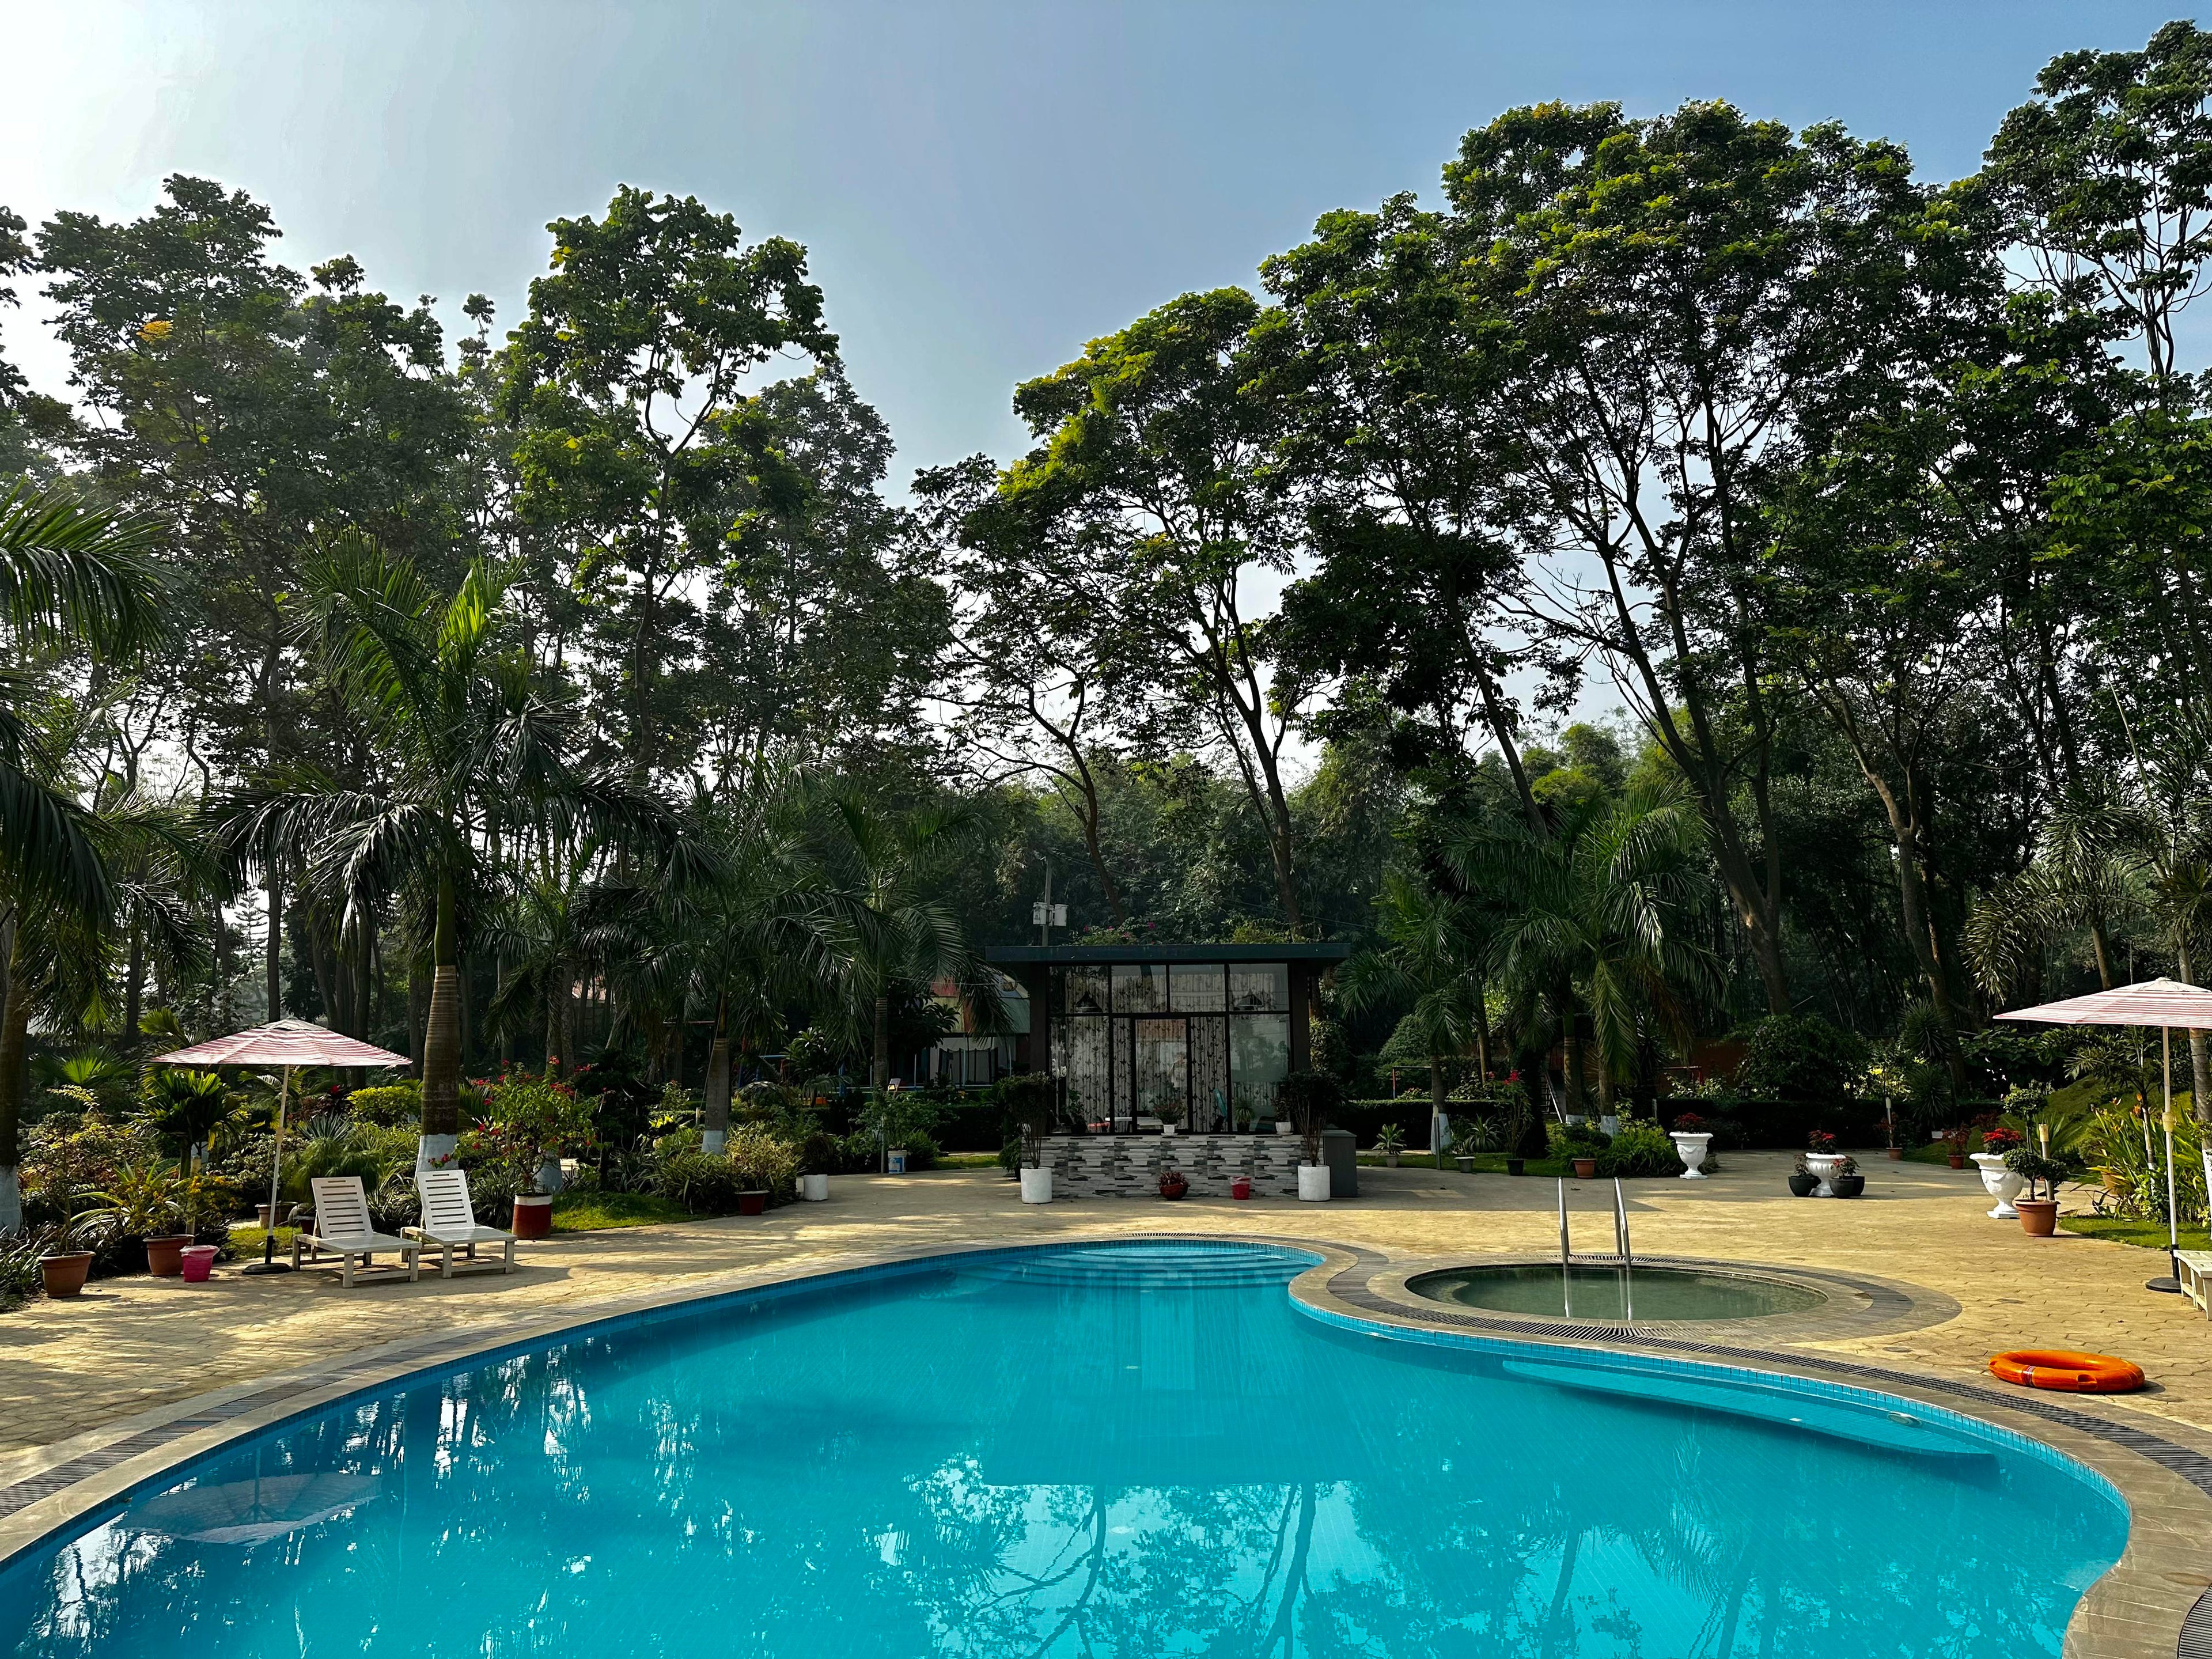 Refreshing pool with sun loungers at Barnochata, a lush resort and Dhaka hotel in Savar, offering a luxurious tropical retreat.